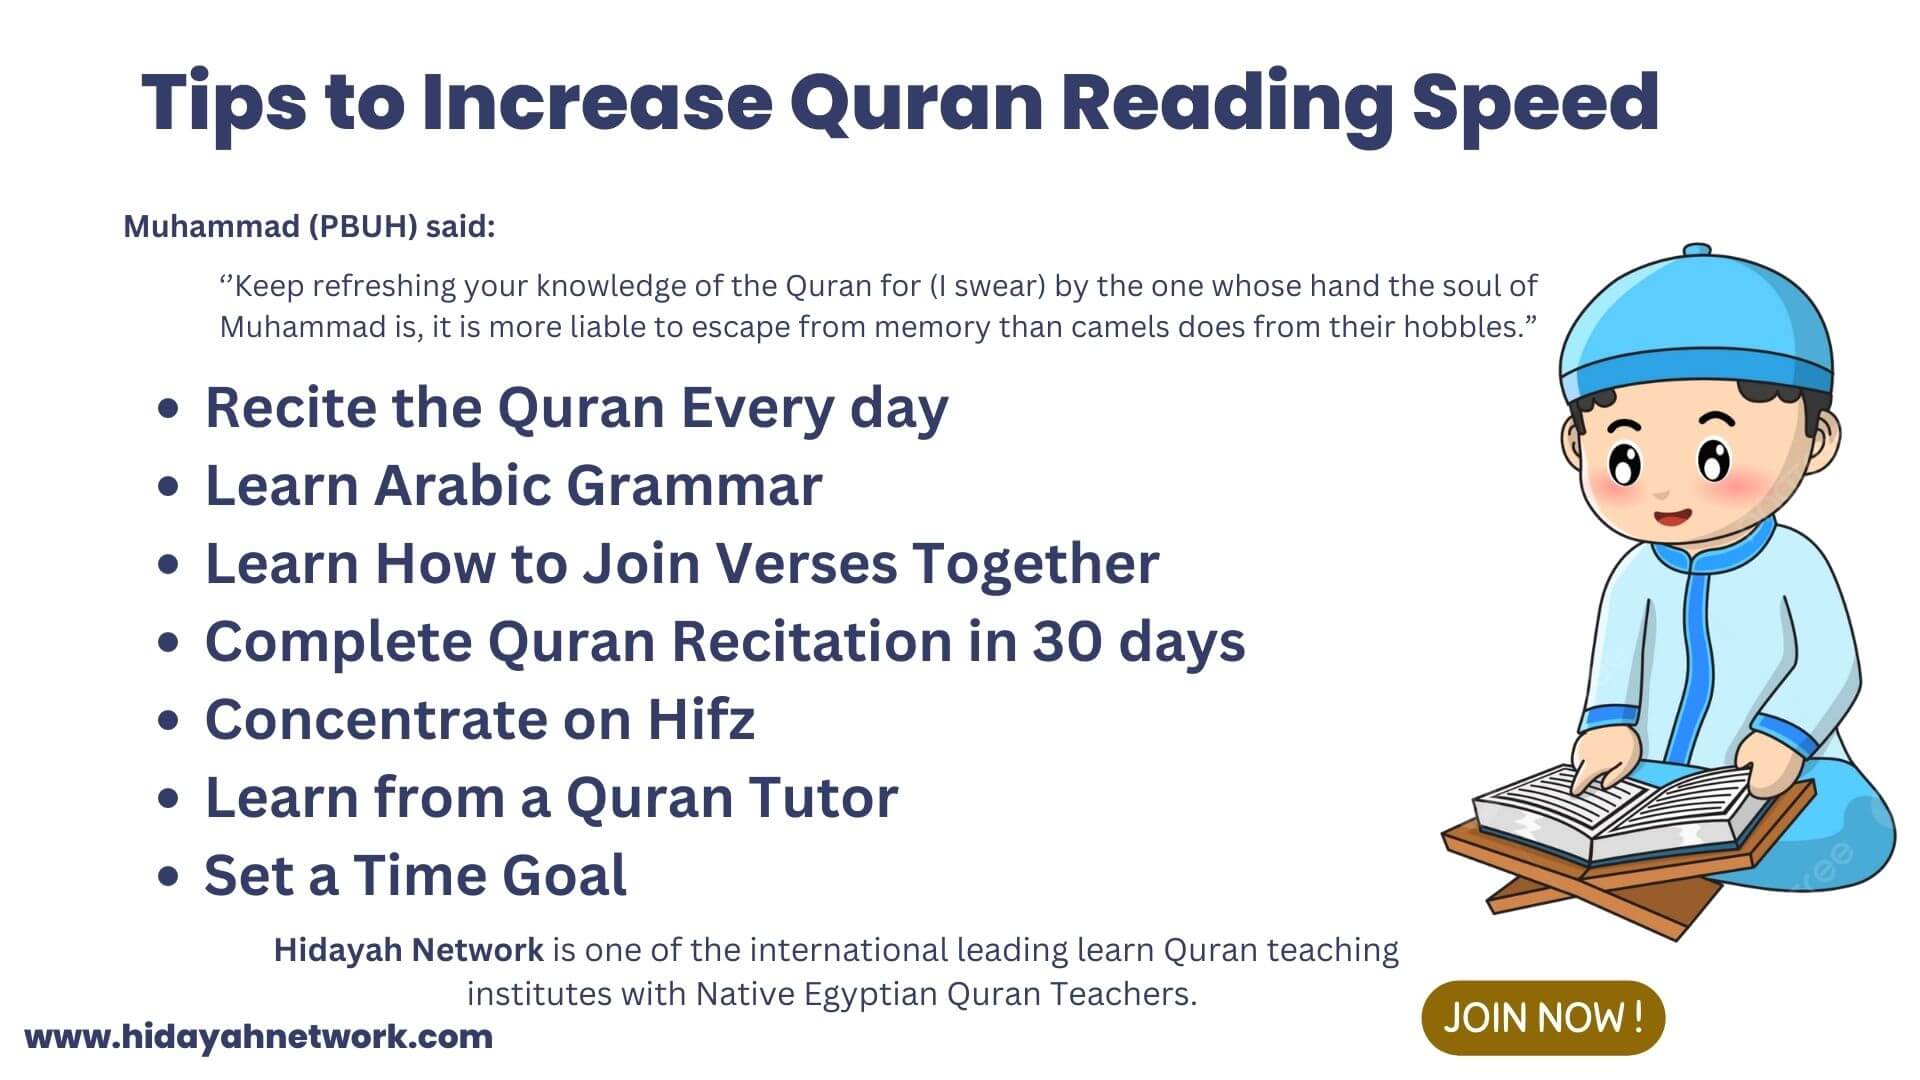 Tips to Increase Quran Reading Speed